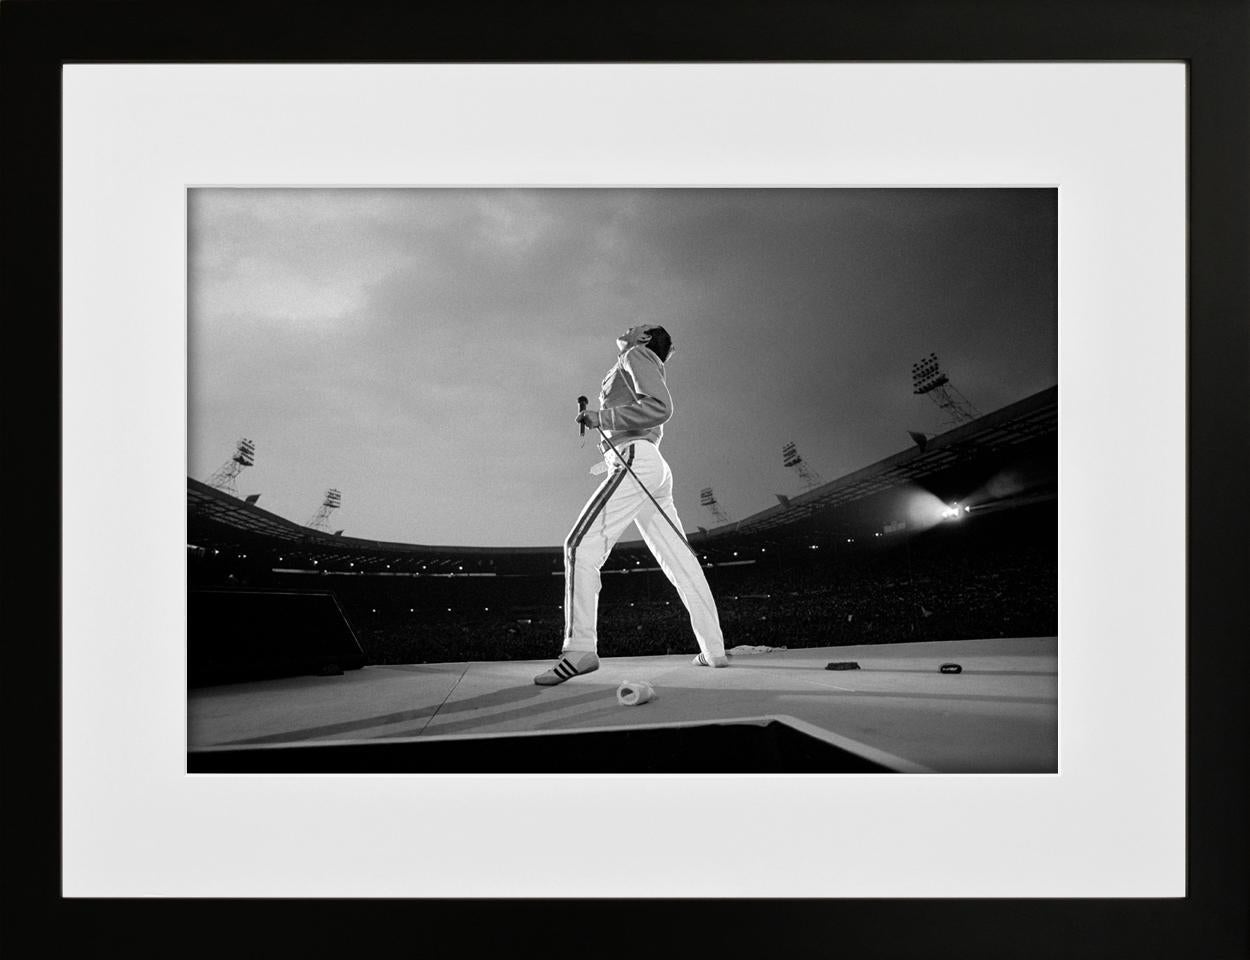 Freddie Mercury, Queen in Concert, Magic Tour, Wembley Stadium, London, 1986 - Photograph by Richard Young